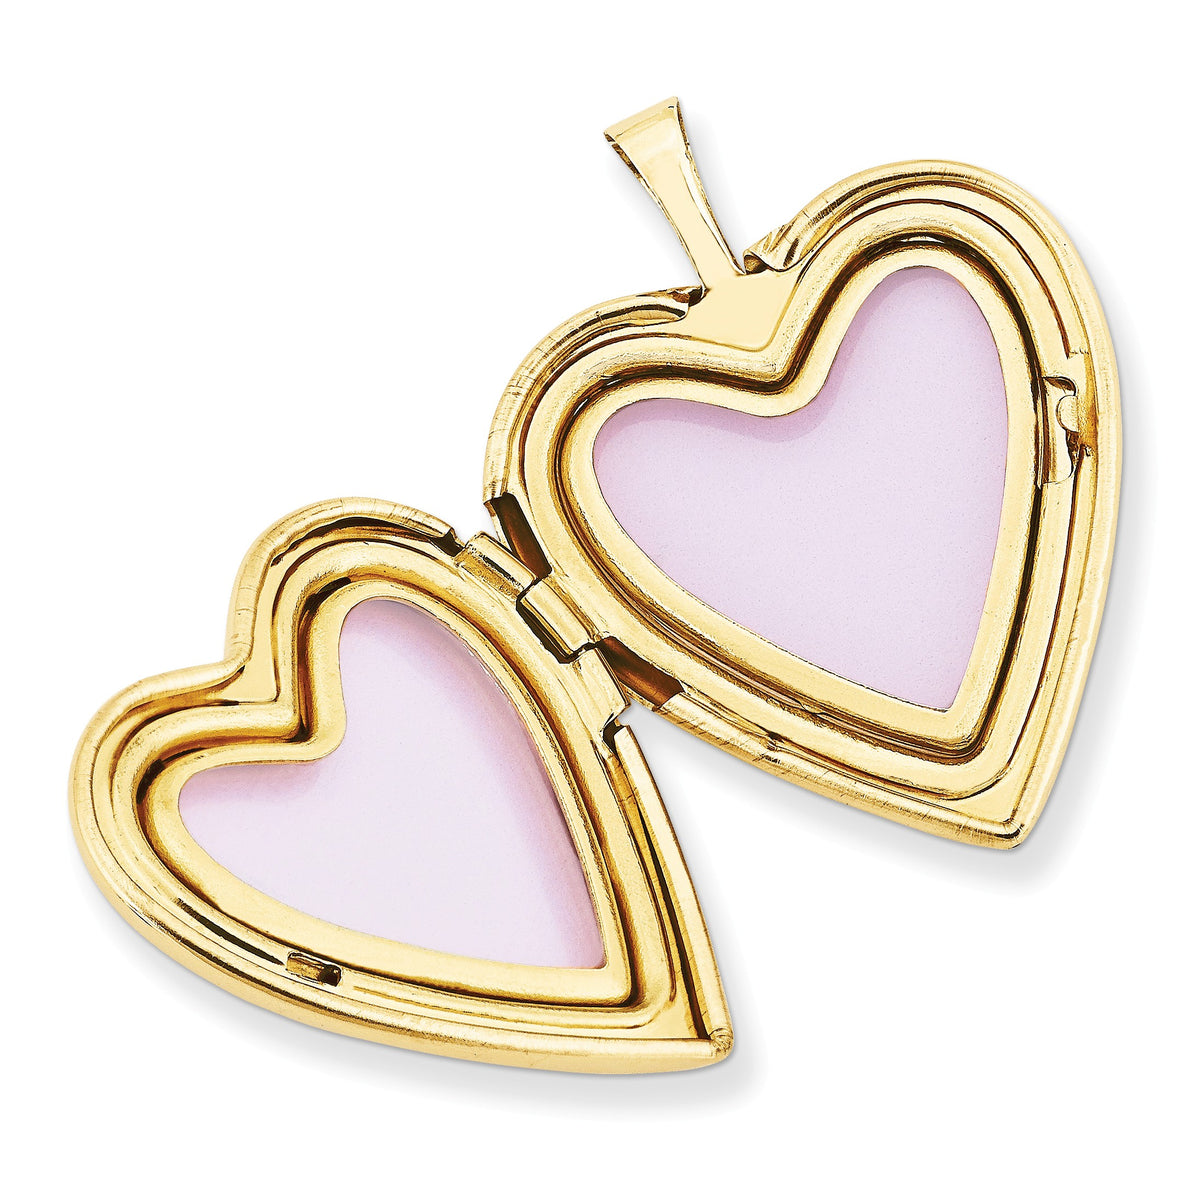 Alternate view of the 14k Yellow Gold and Enamel I Love You Rose Heart Locket, 20mm by The Black Bow Jewelry Co.